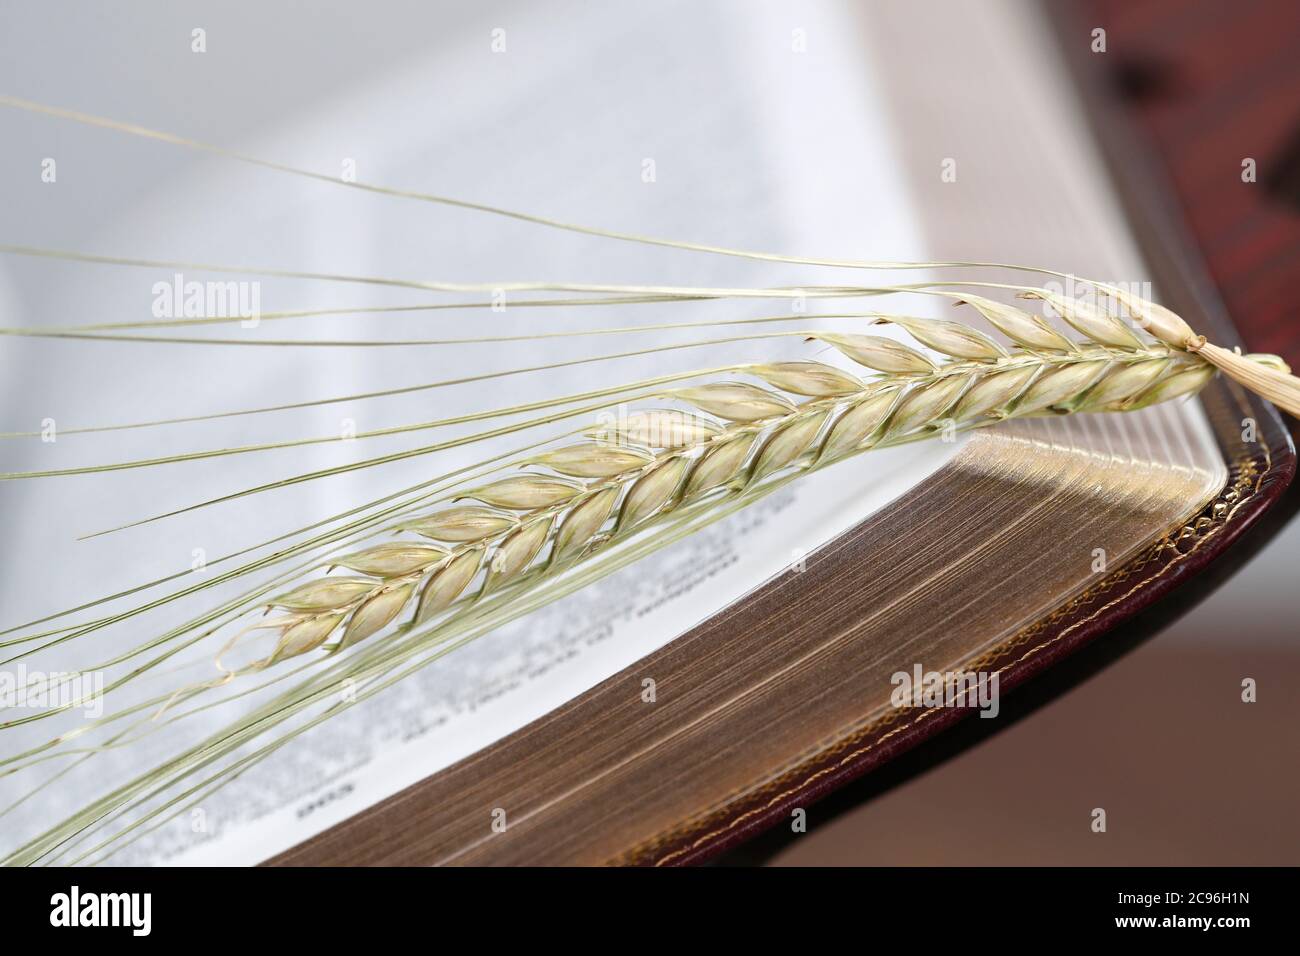 The sacred book of the Bible and ears of wheat as a symbol of spiritual and physical food.  France. Stock Photo